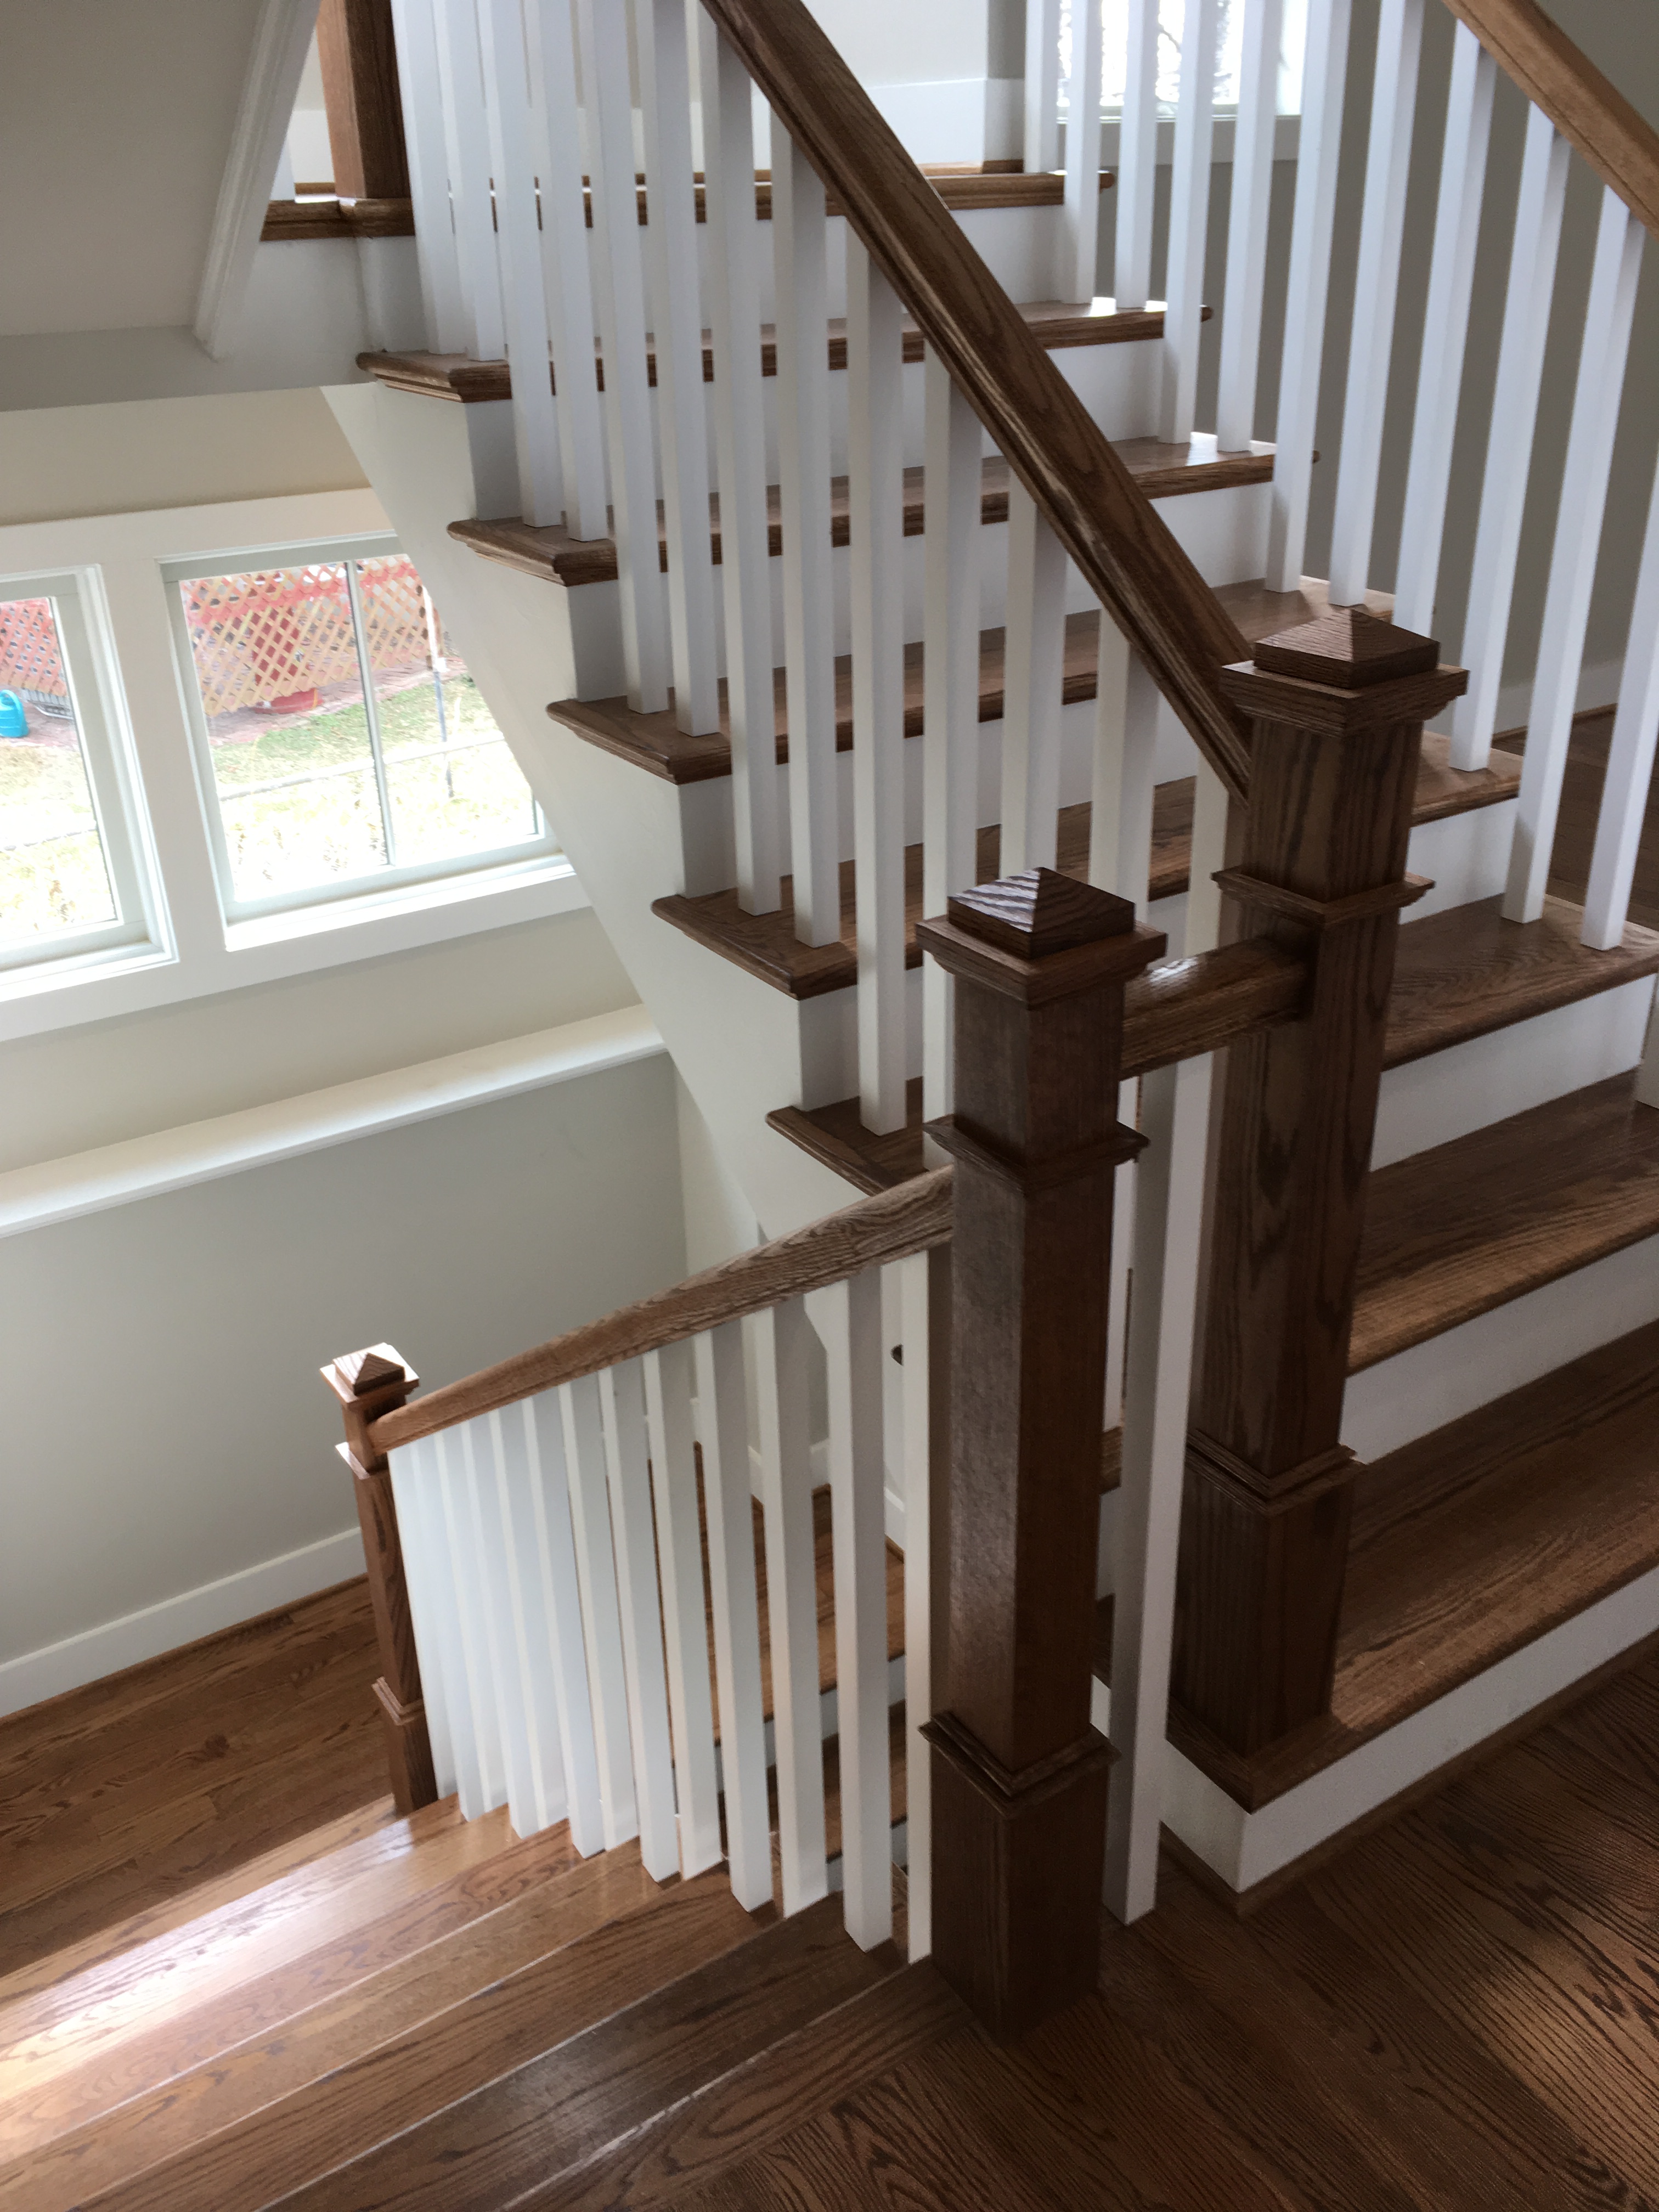 dark wood staircase and railings with white balusters